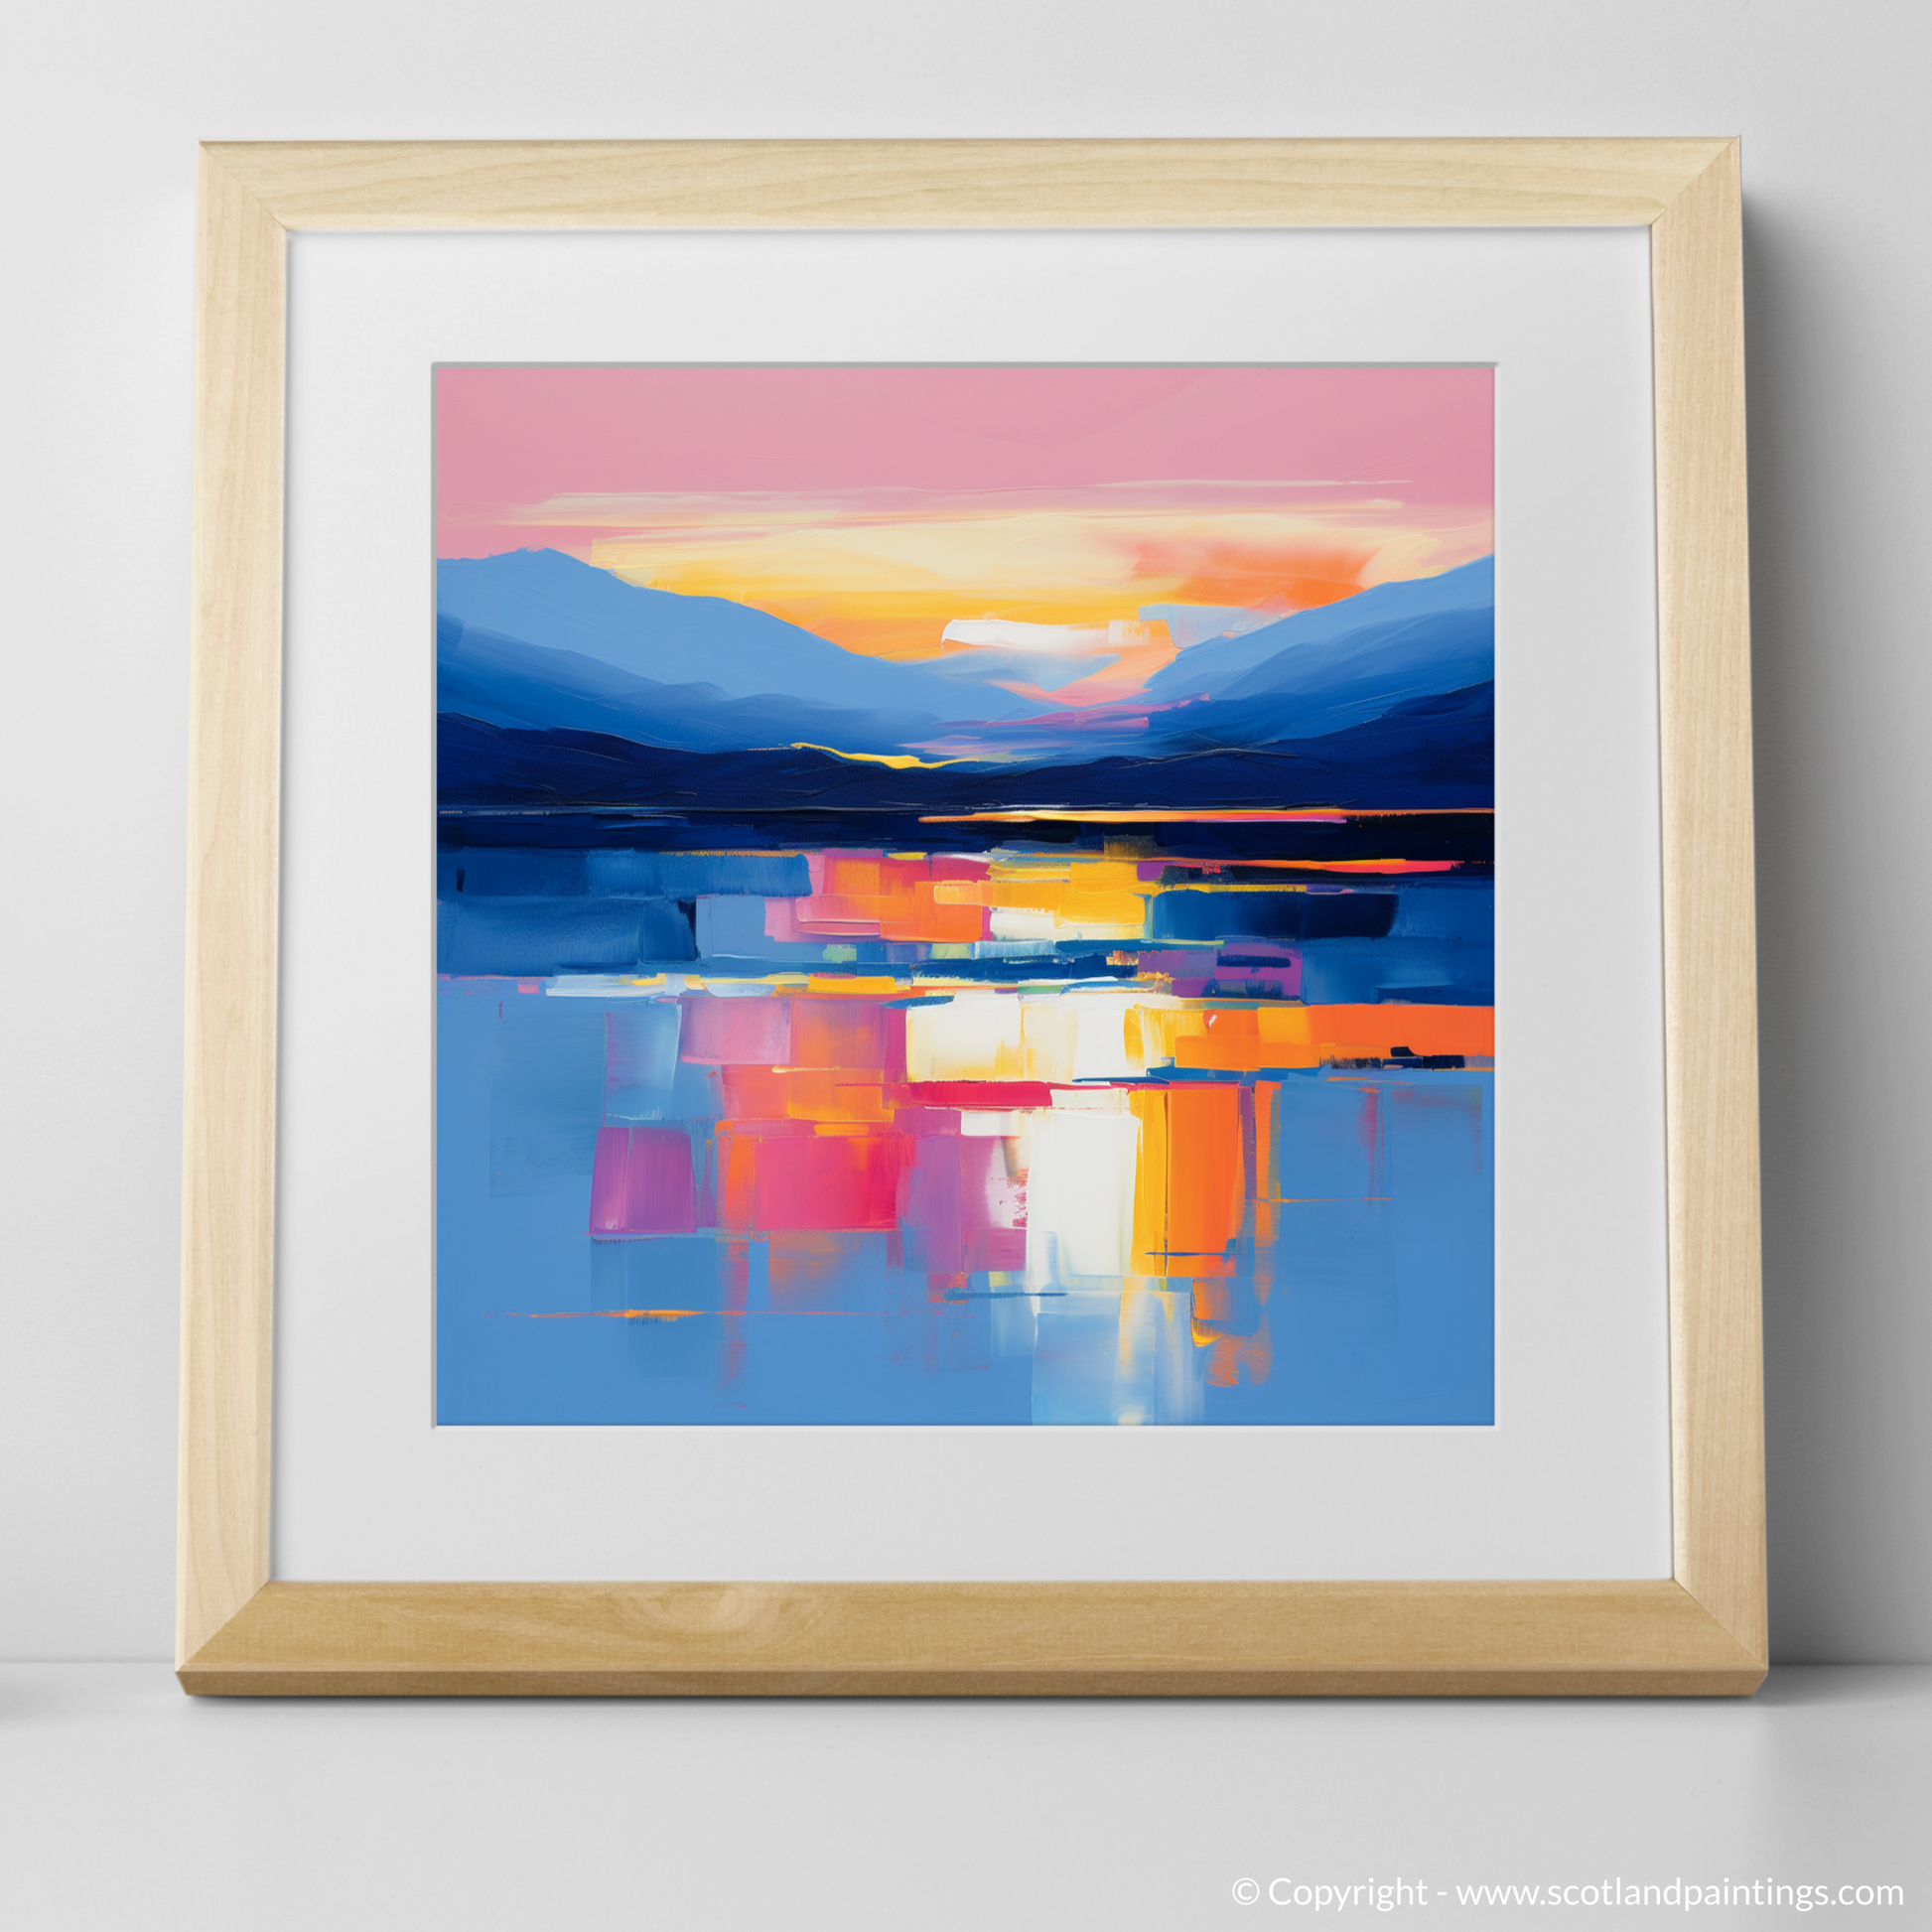 Art Print of Dusk on Loch Lomond with a natural frame